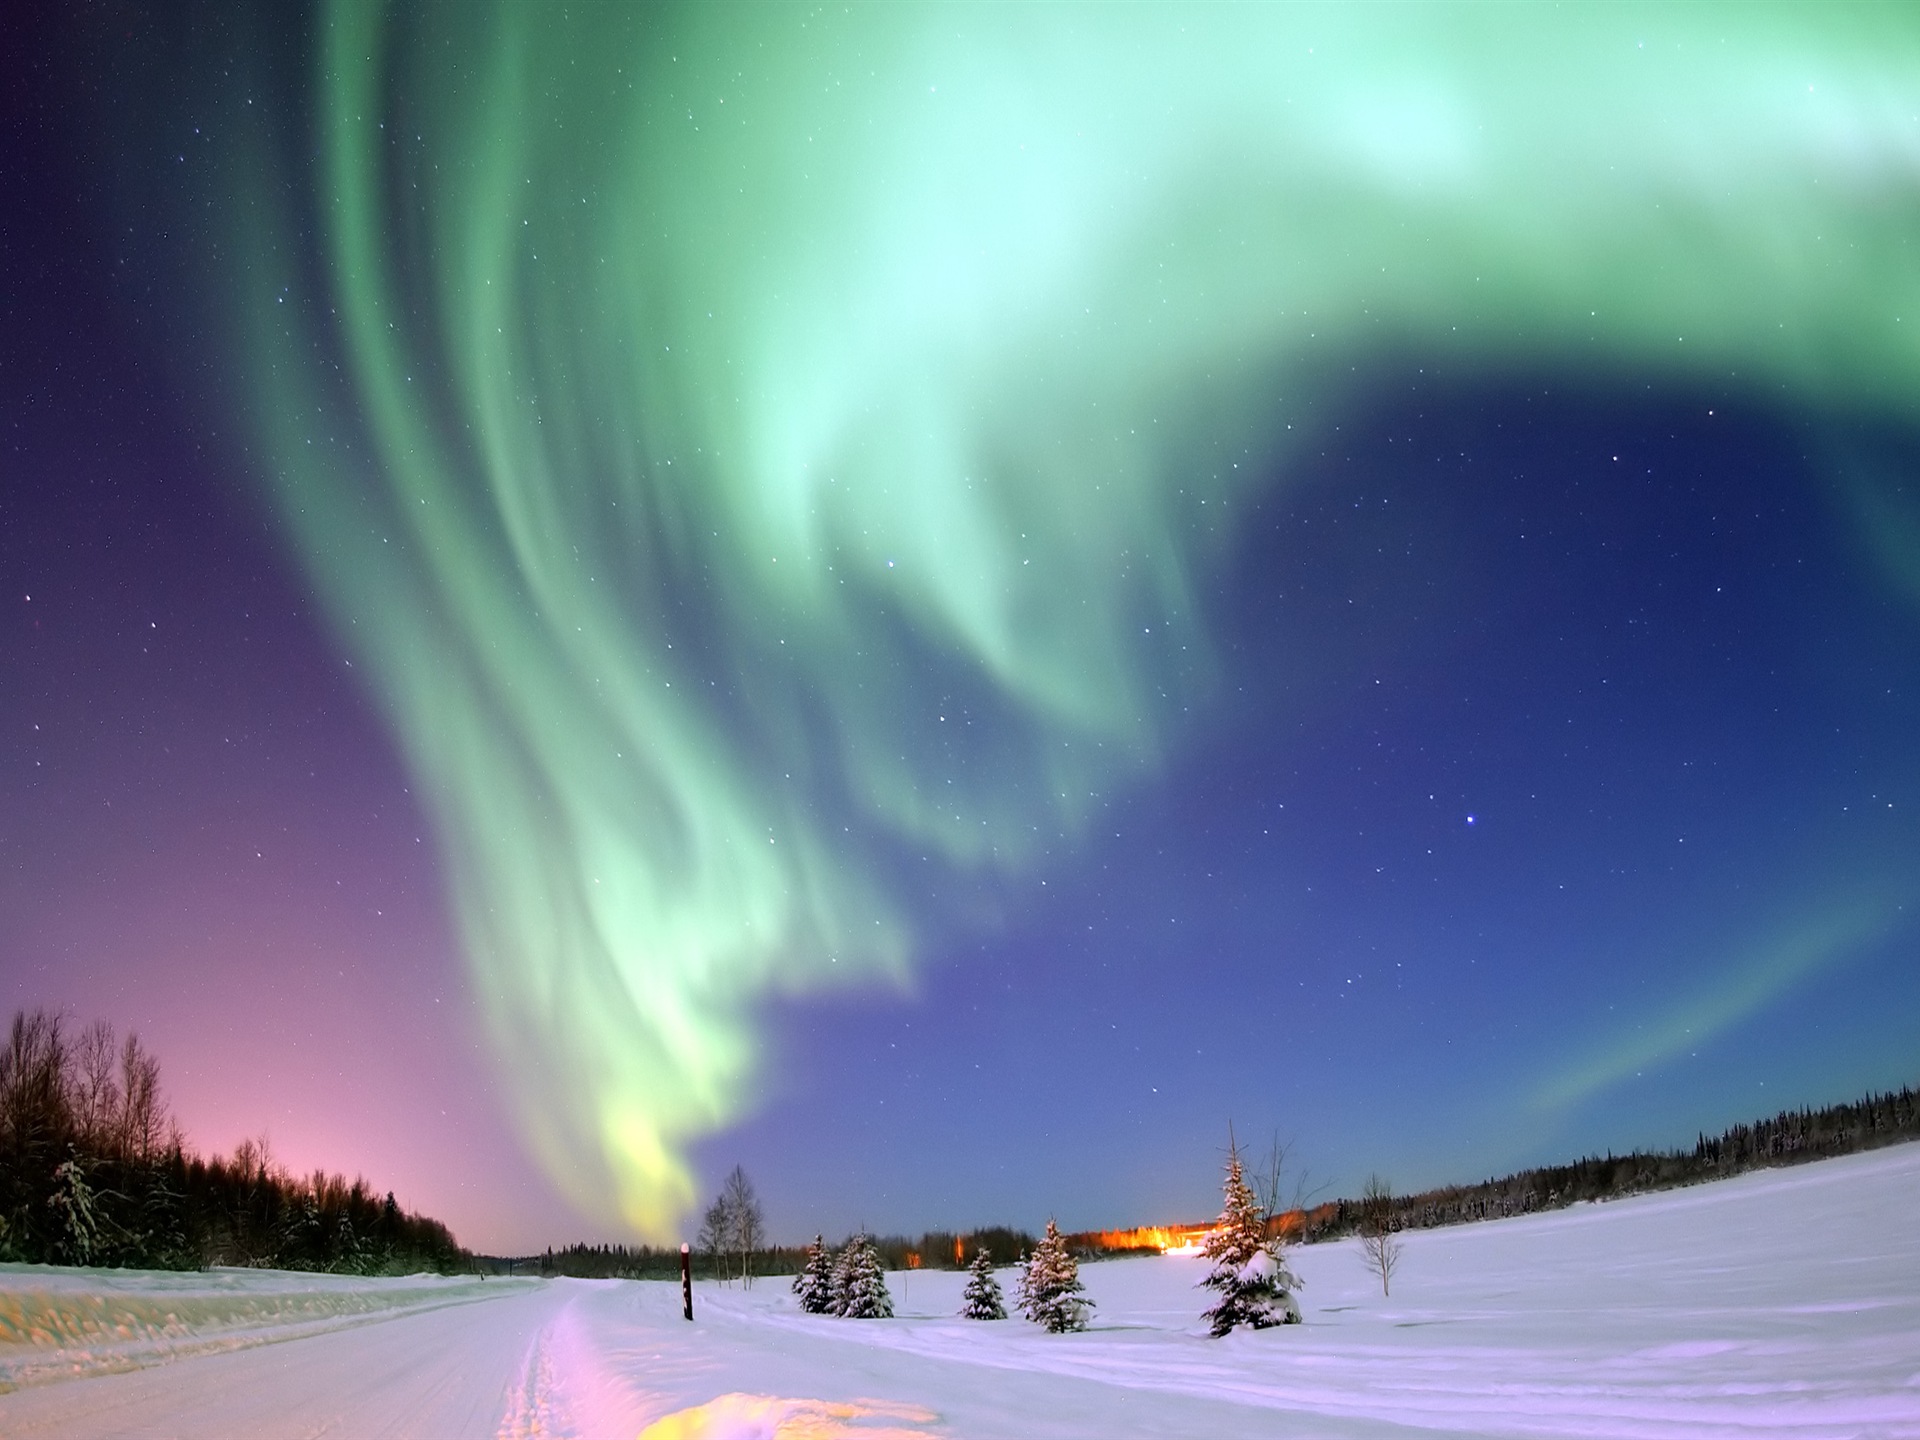 Natural wonders of the Northern Lights HD Wallpaper (2) #22 - 1920x1440